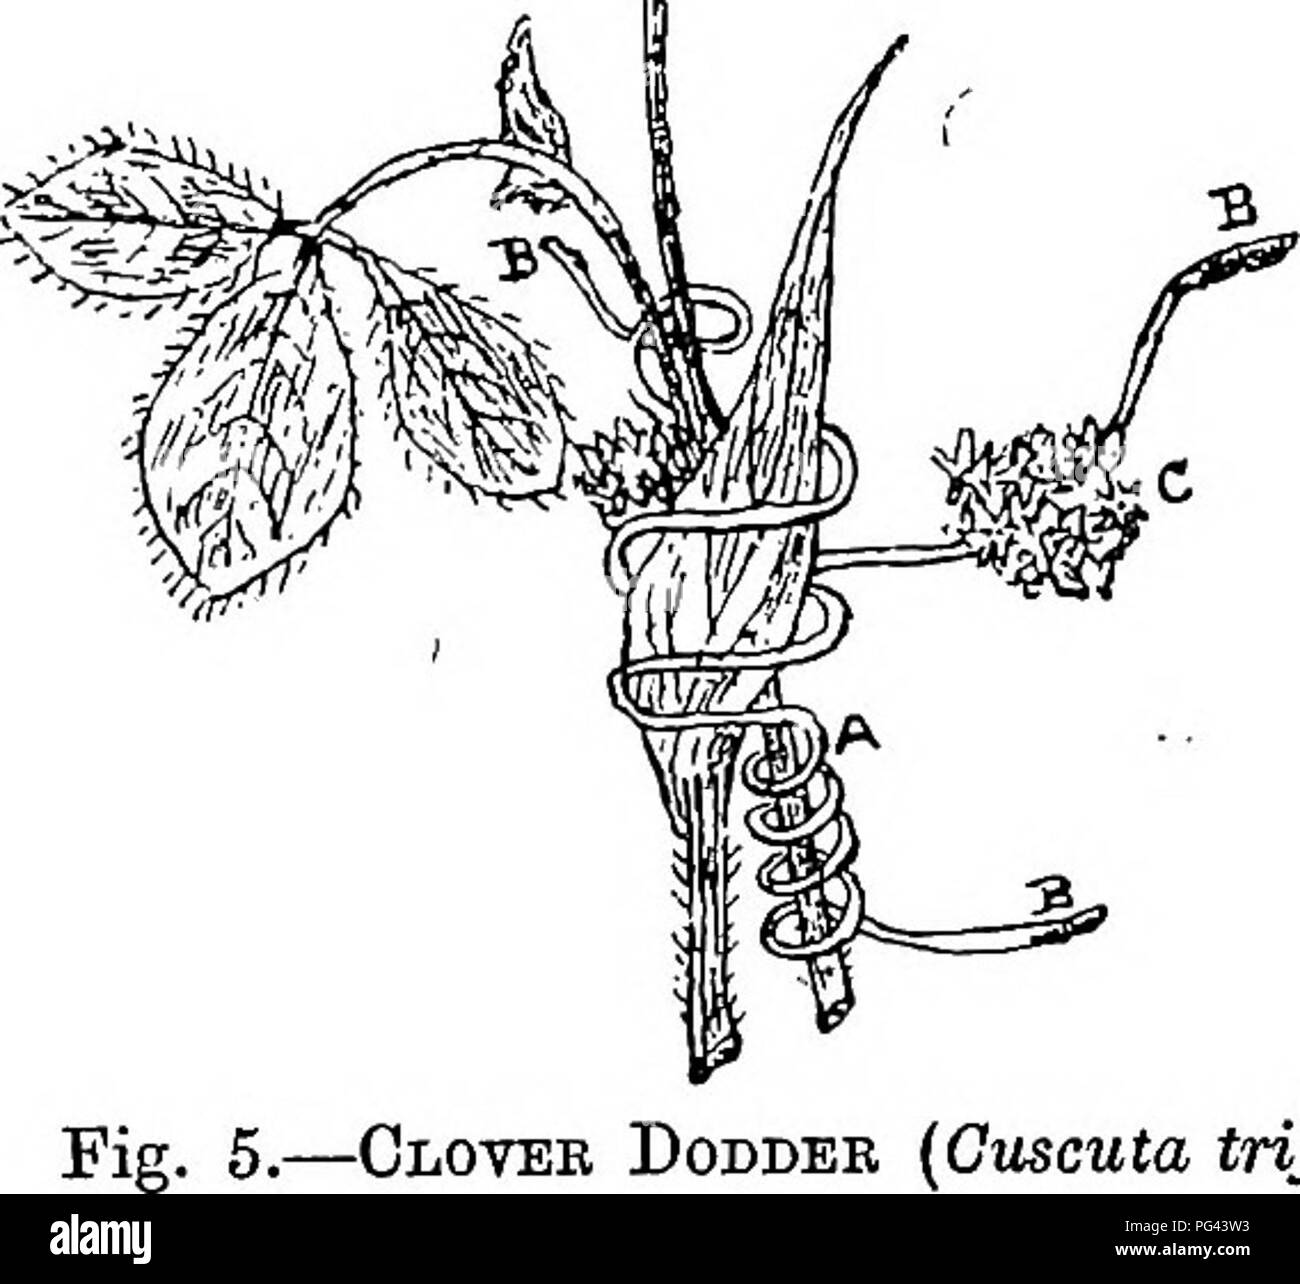 . The diseases of crops and their remedies : a handbook of economic biology for farmers and students. Plant diseases. LEGUMINOUS CBOPS. 21 The twining stem of dodder is of a yellowisti colour, containing (in the spring and summer) clusters of pLnkish, funnel-shaped flowers, and is provided with suckers (Mg. 5 B) which are used for extracting nourishment from the host upon which it lives. The seeds of dodder have a rough surface, and are smaller than those of the clover plant. The seeds of both clover and dodder are of a brown colour, but the former have a smooth surface.. Cloyee Dodder (Gxiscu Stock Photo